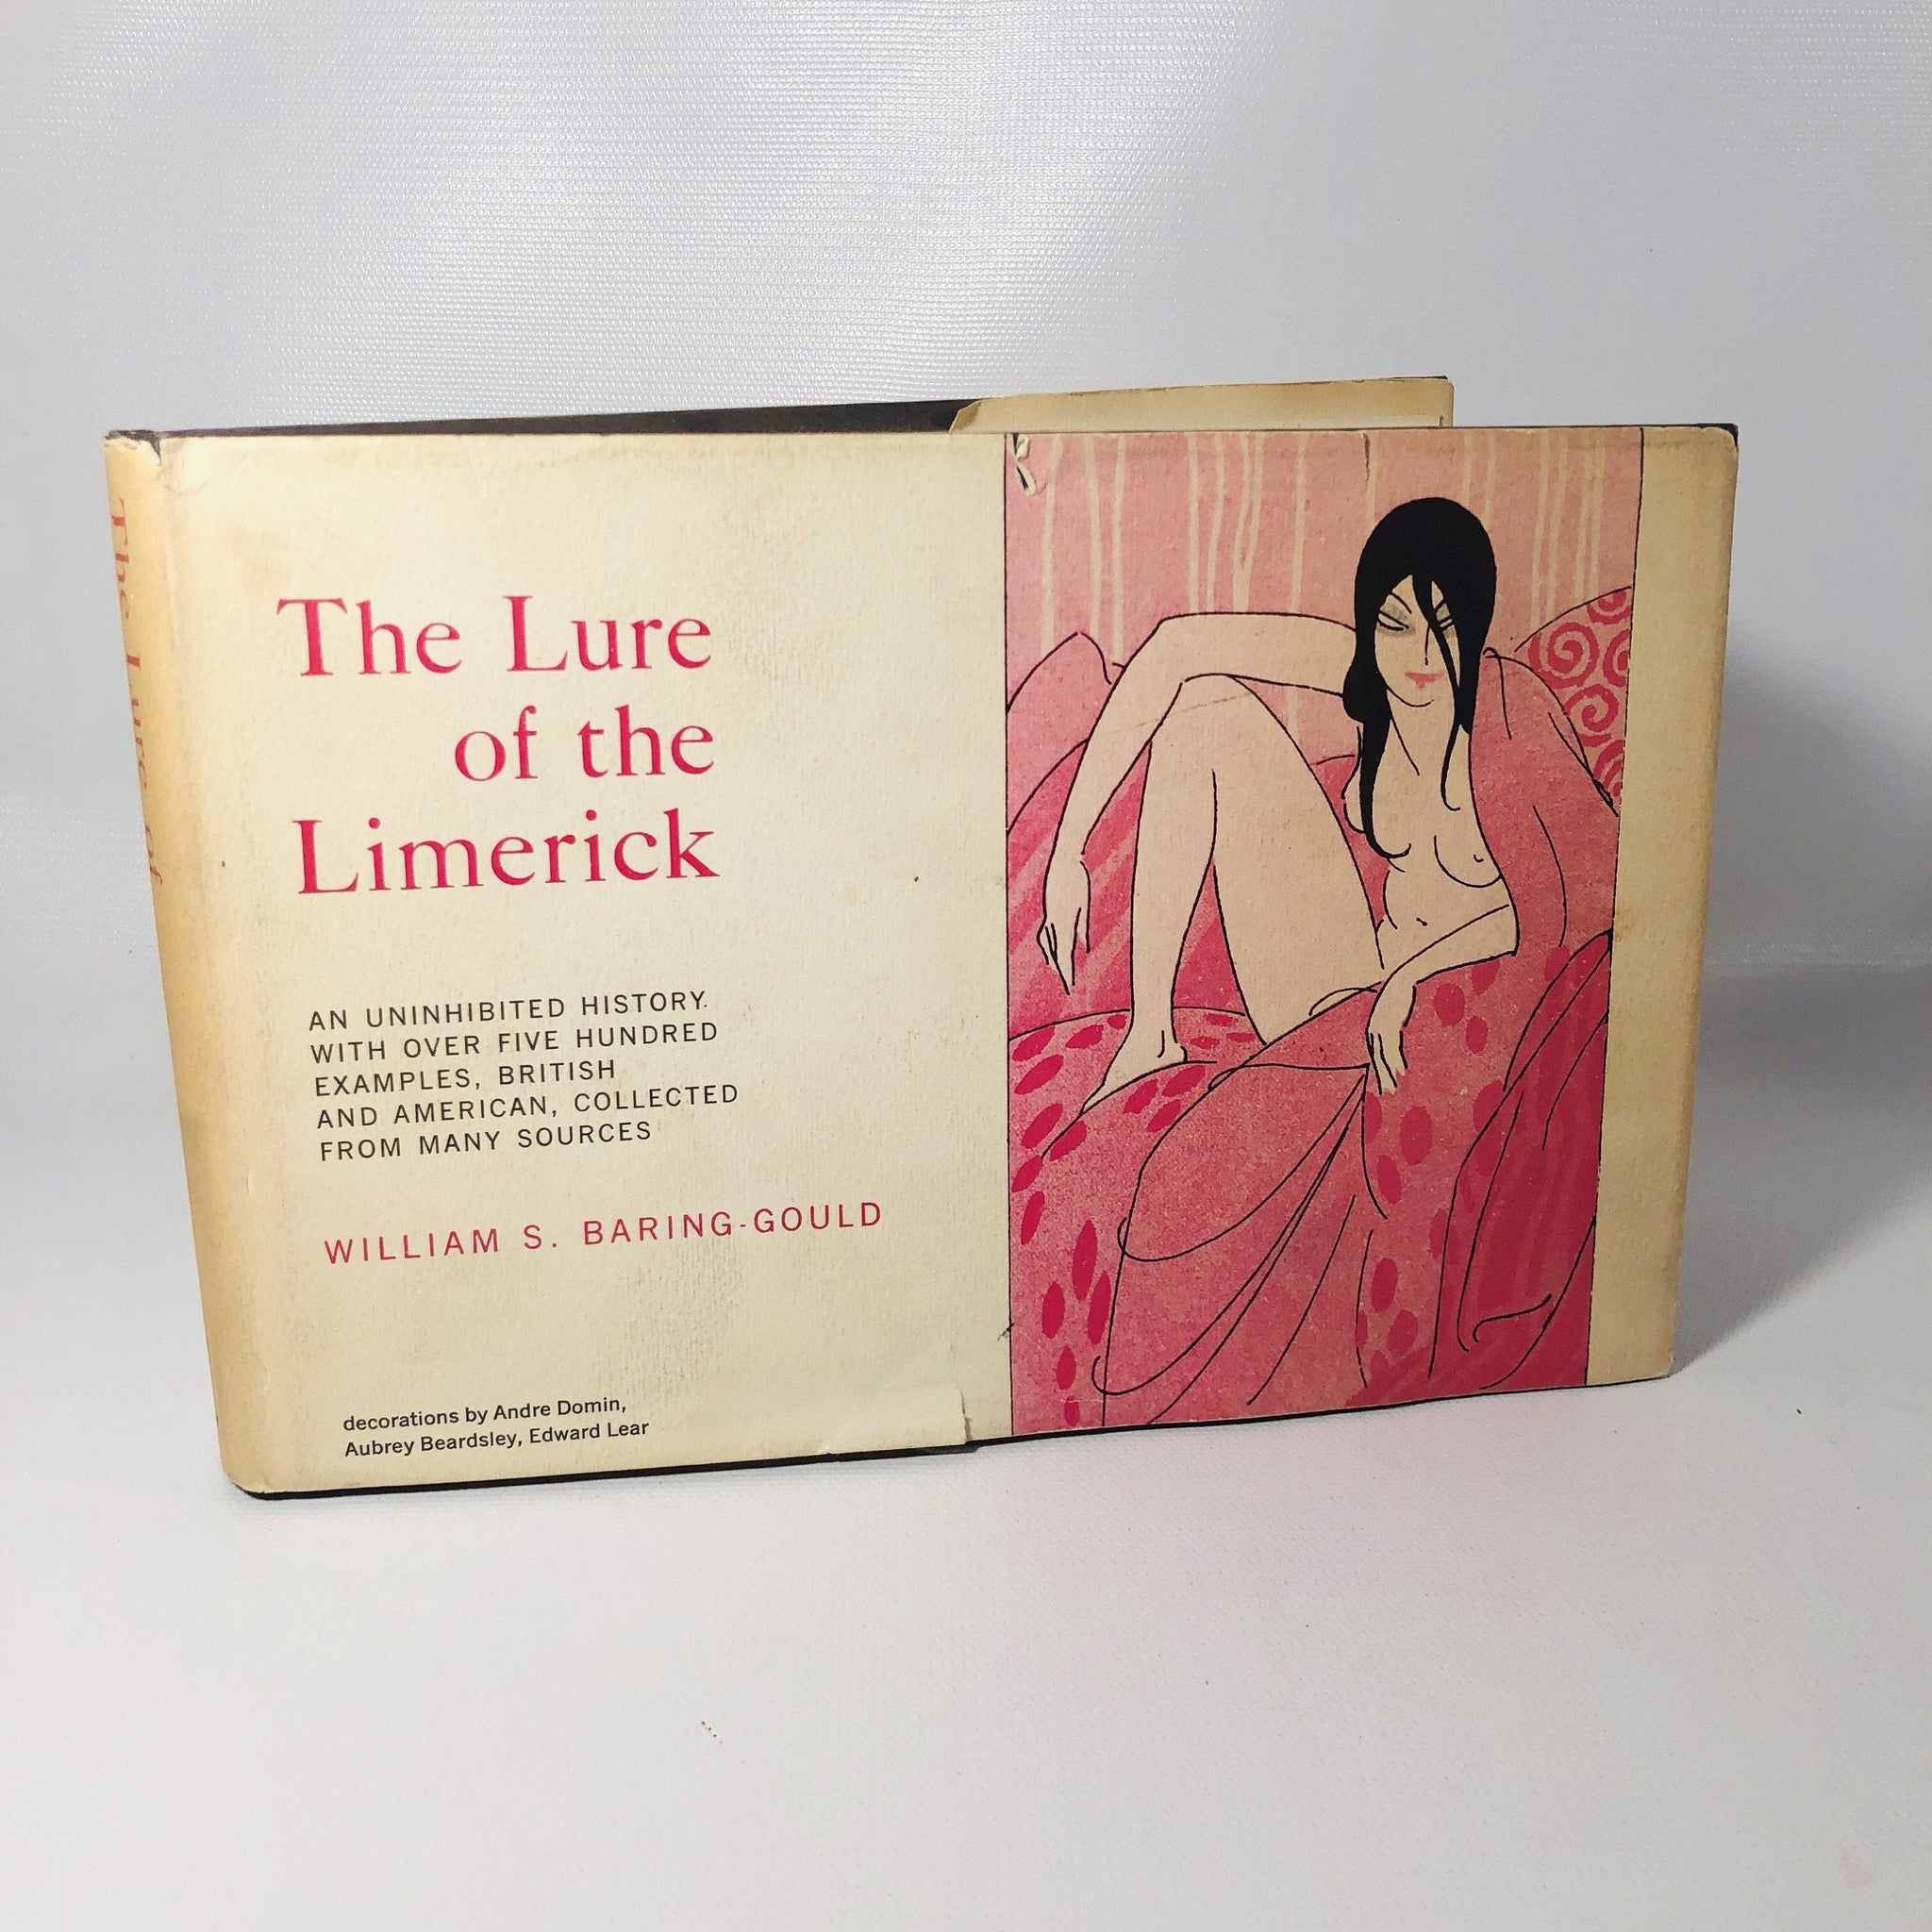 The Lure of the Limerick by William S. Baring-Gould 19676 Vintage